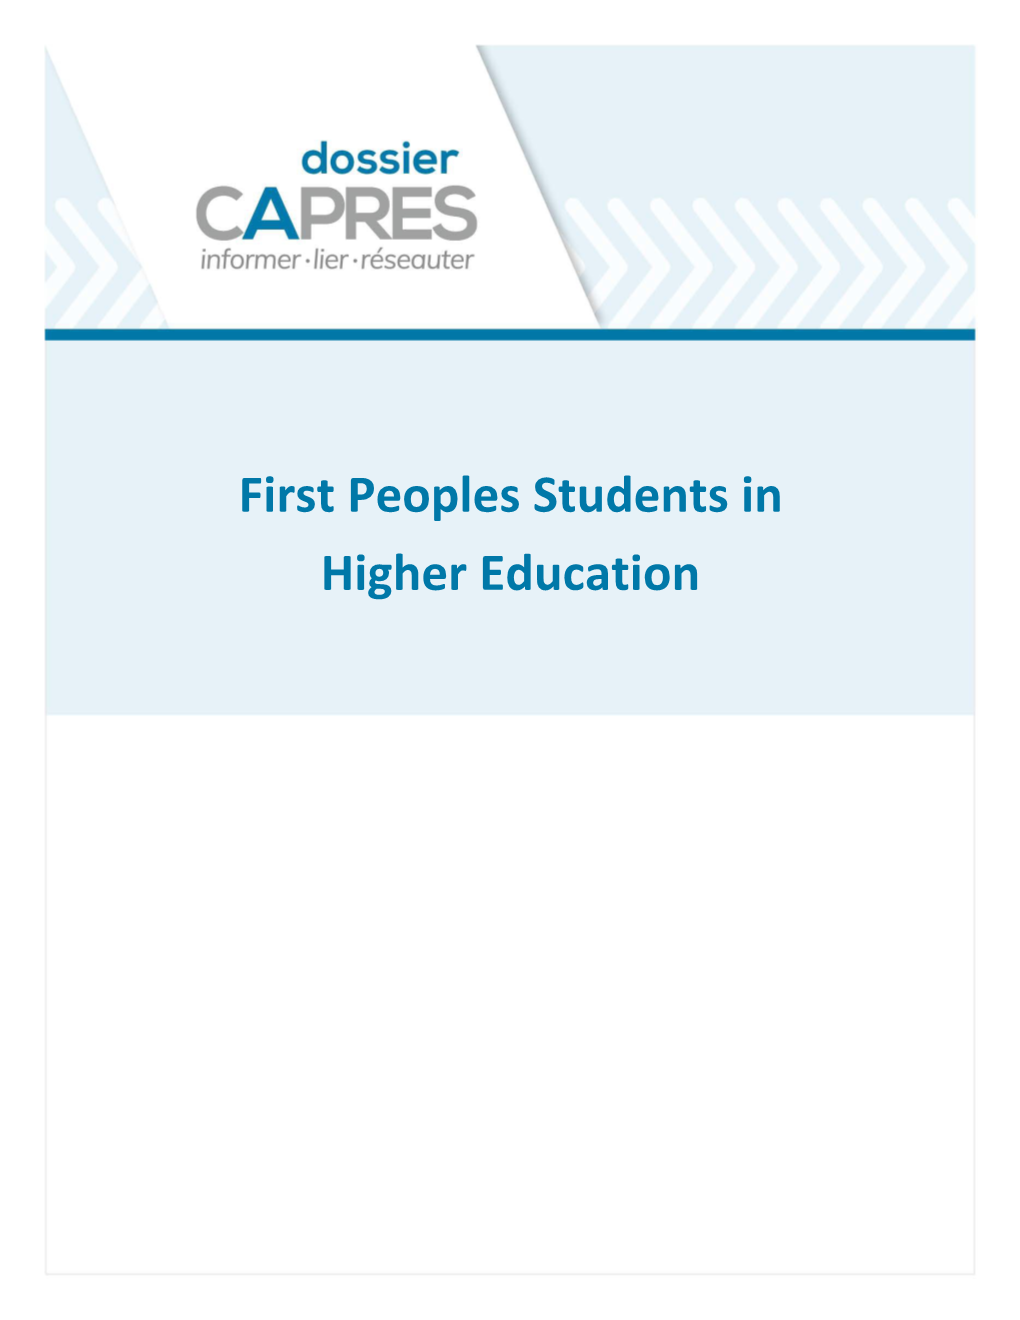 First Peoples Students in Higher Education